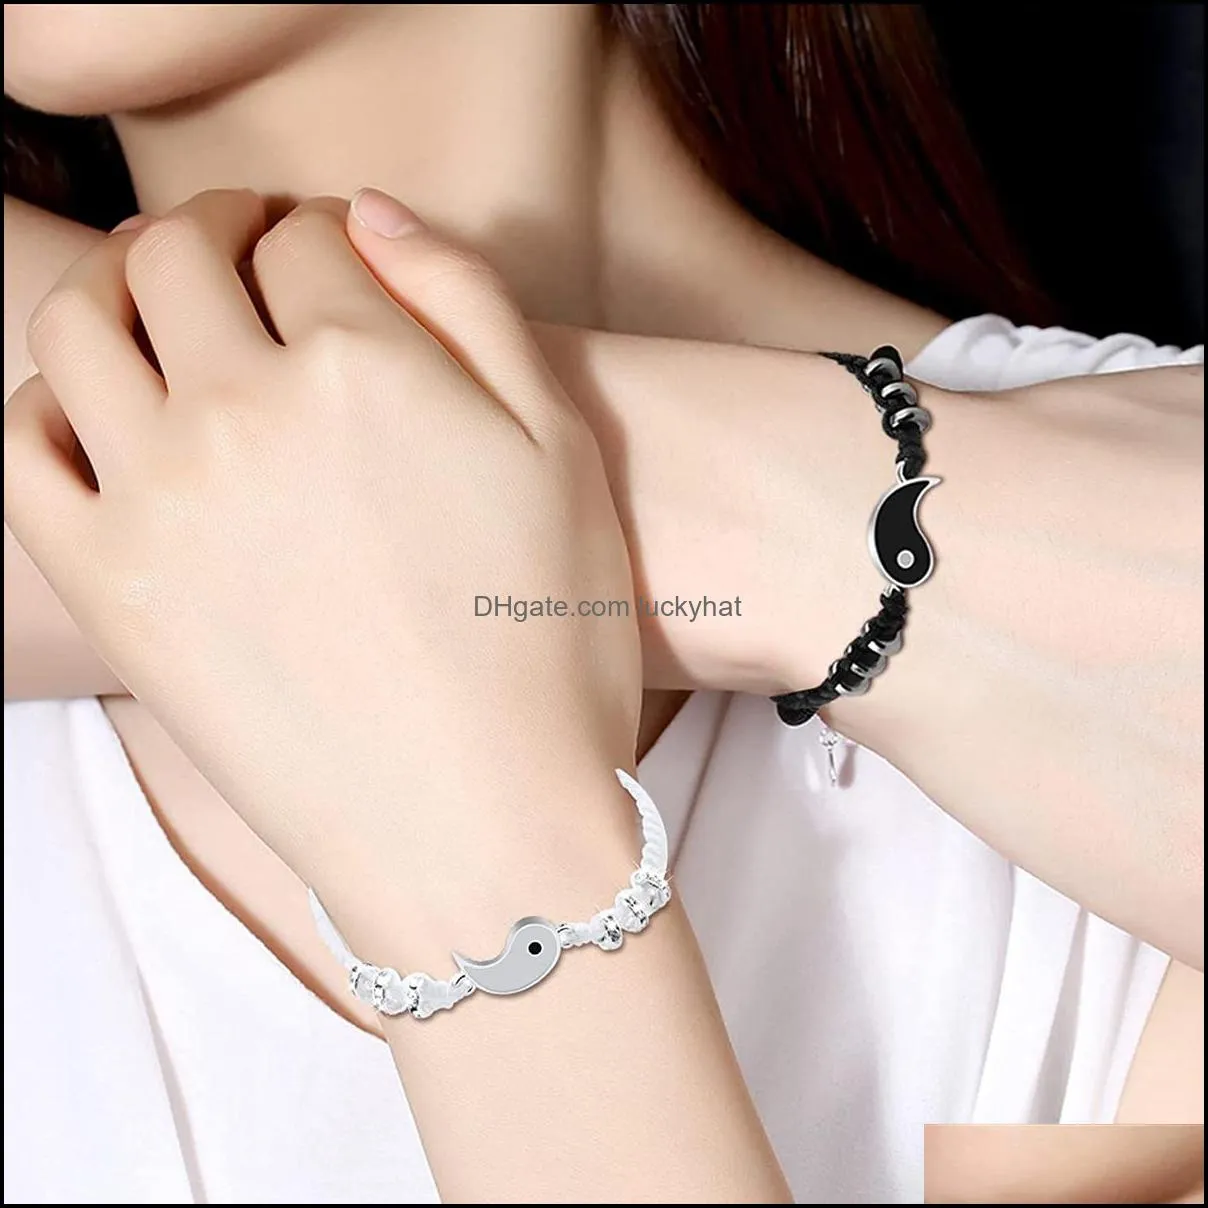 12sets yinyang taiji bracelet adjustable link chain black white matching traditional chinese weaving handicrafts suitable for couples friends yin yang